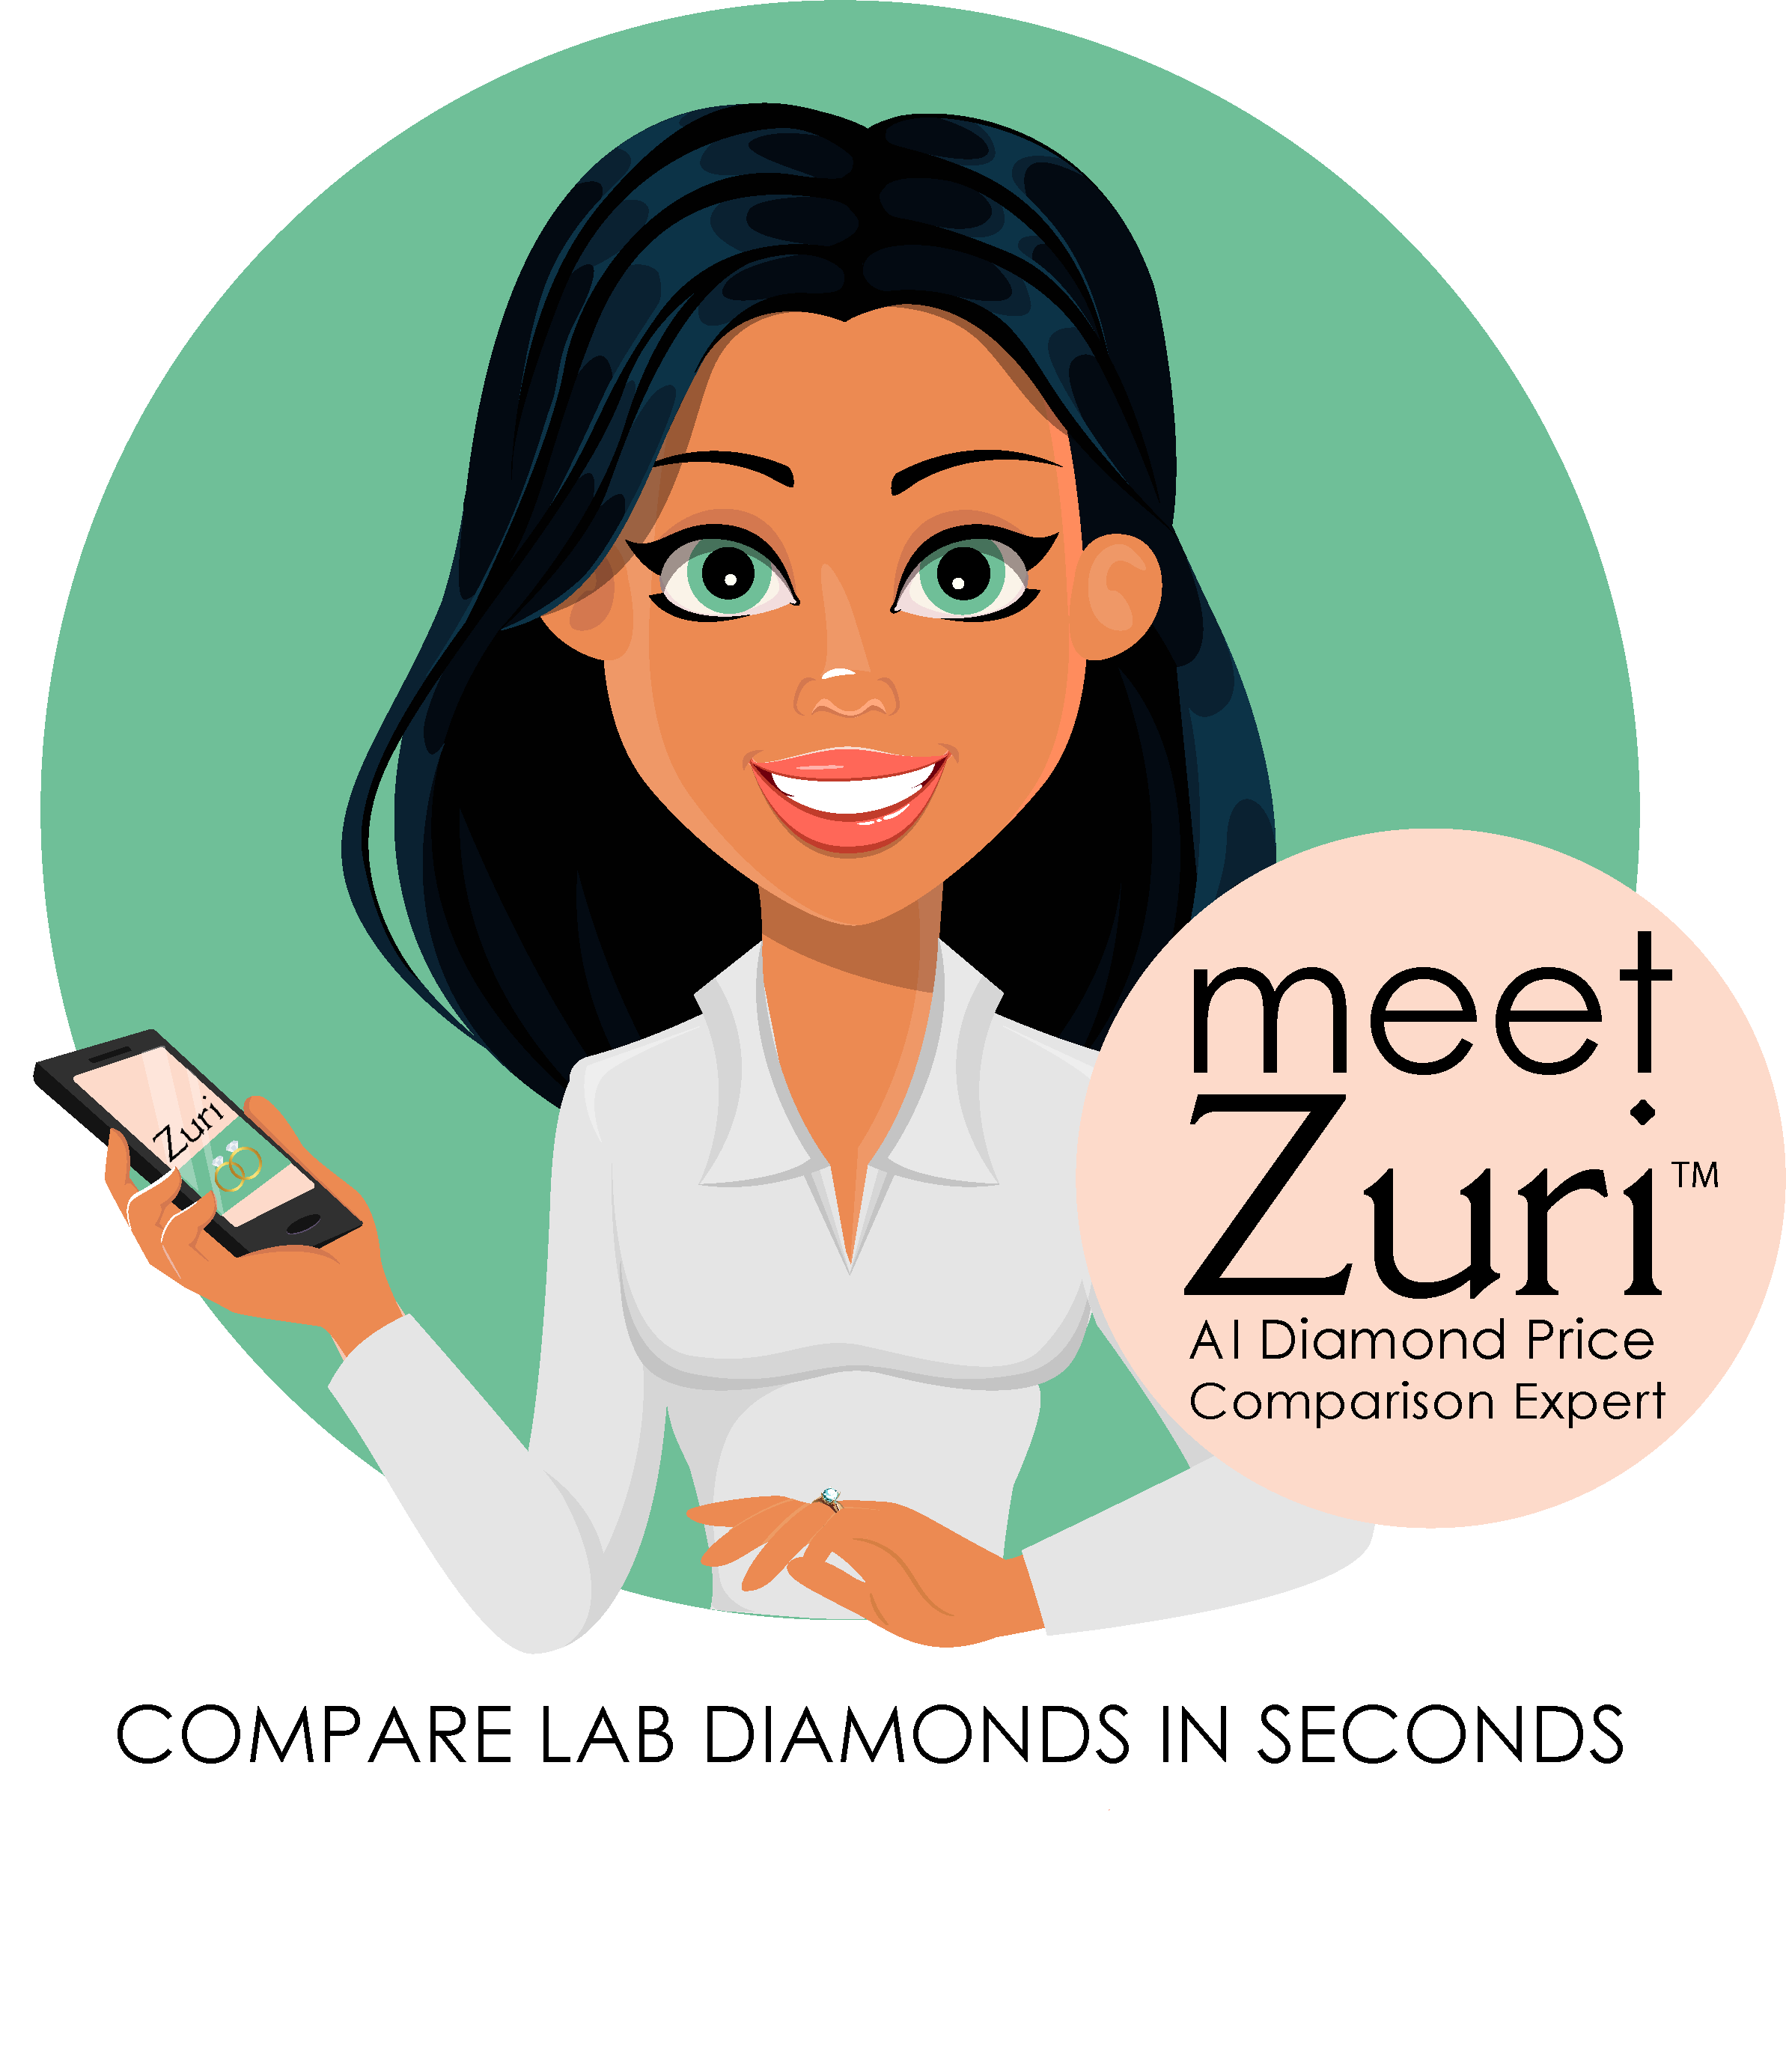 The Art of Jewels Introduces Zuri™, an Exclusive AI Quality & Price Comparison Tool Designed to Assist Consumers When Choosing a Lab Grown Diamond